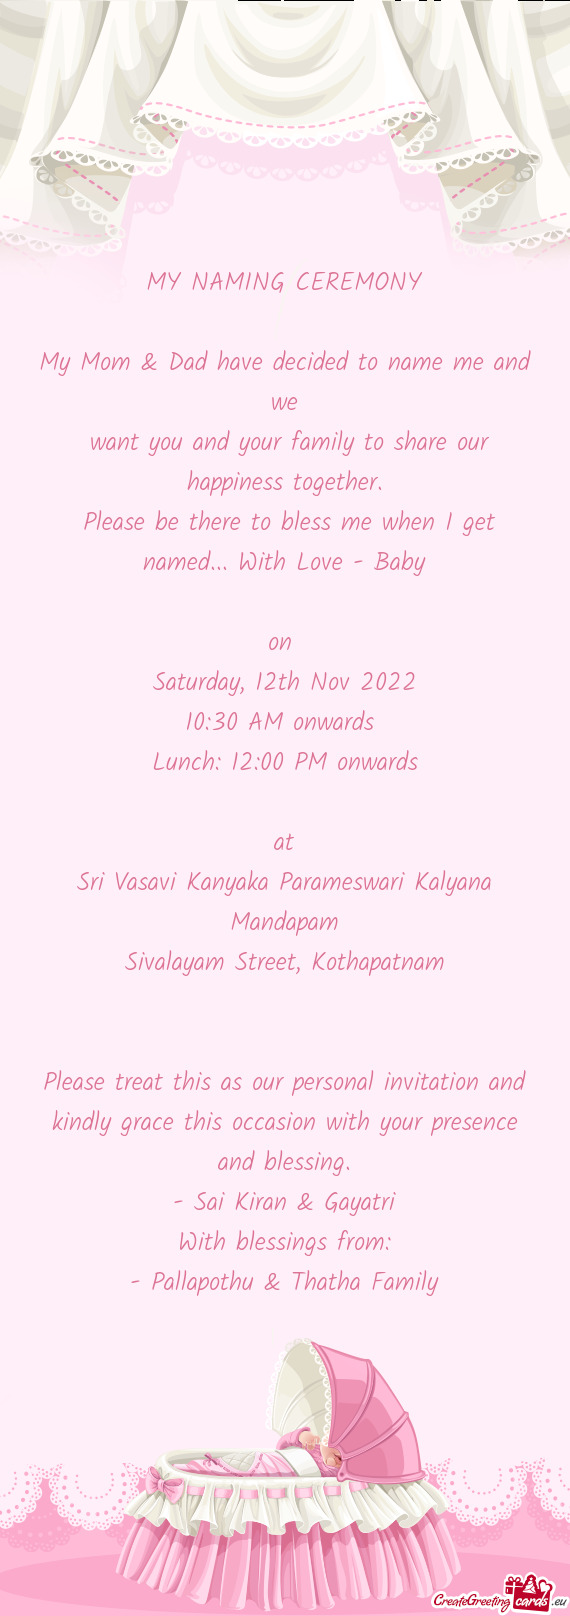 Please be there to bless me when I get named... With Love - Baby